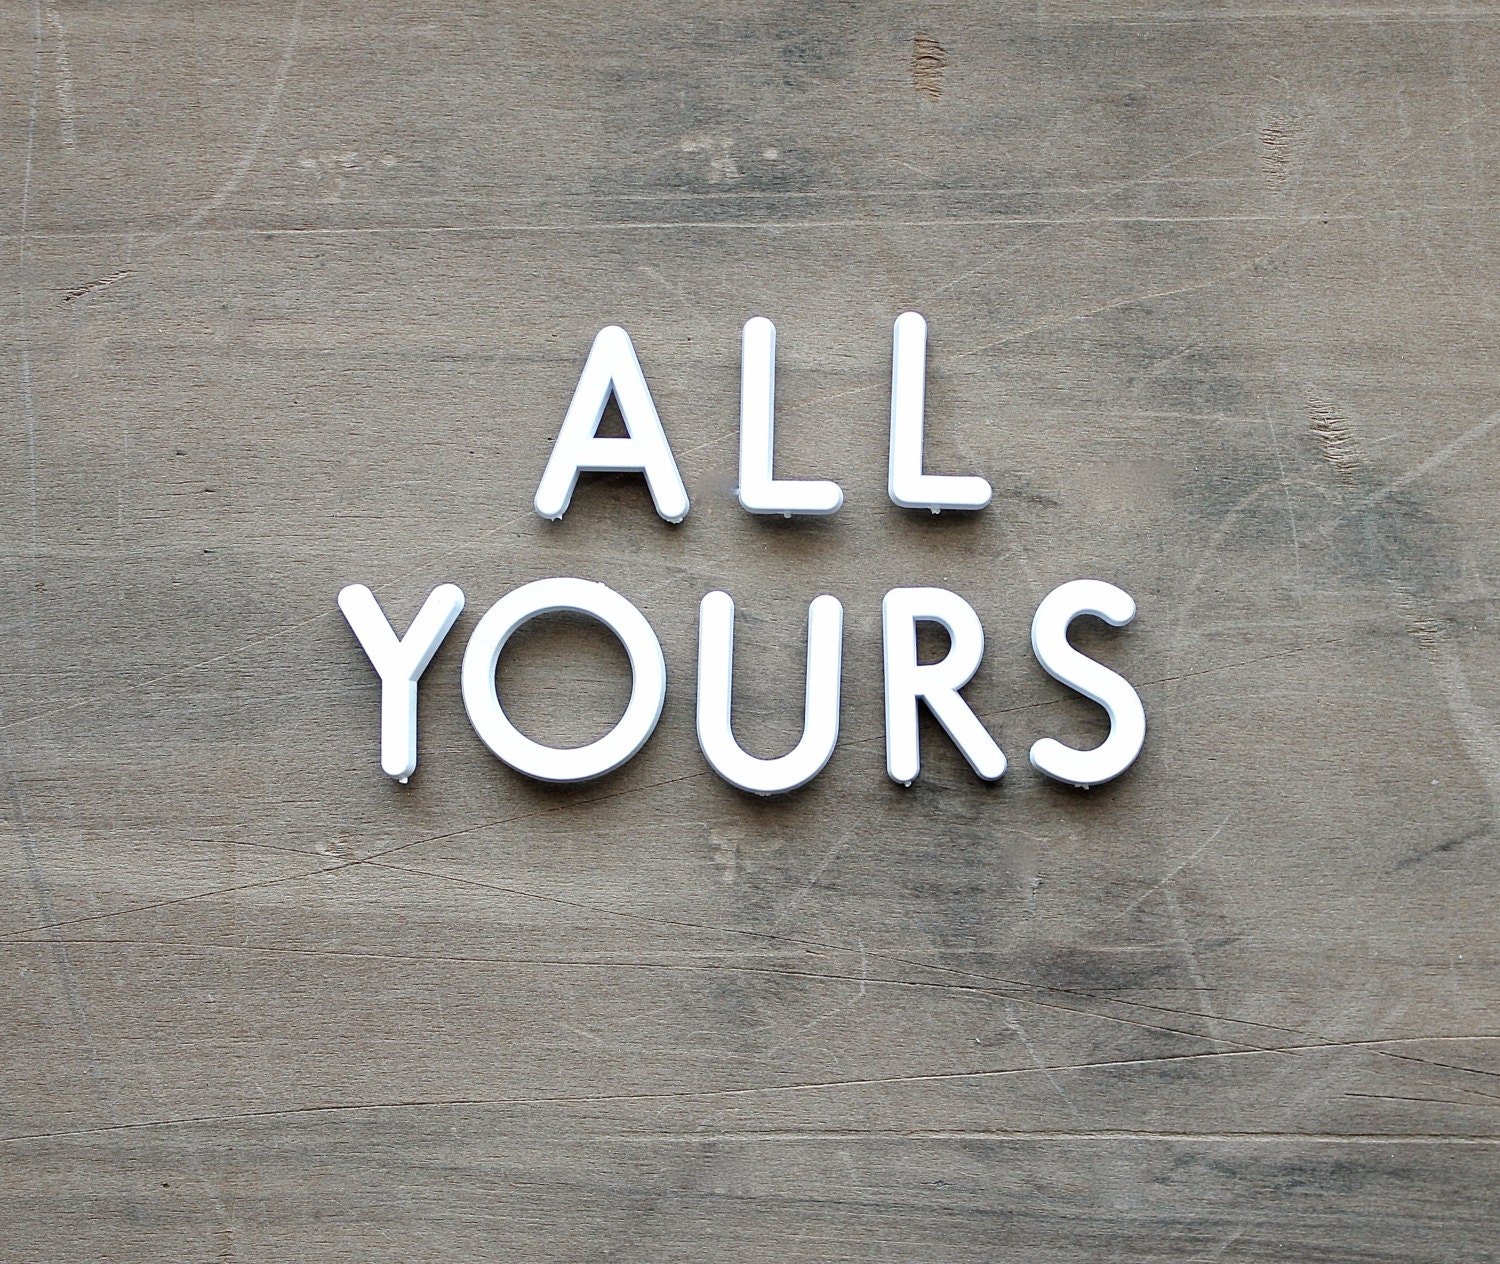 All Yours - Vintage Push Pin Letters - Sign - Valentine's Day - Romantic - Rustic - White - Letters - Supplies - Home Decor - becaruns